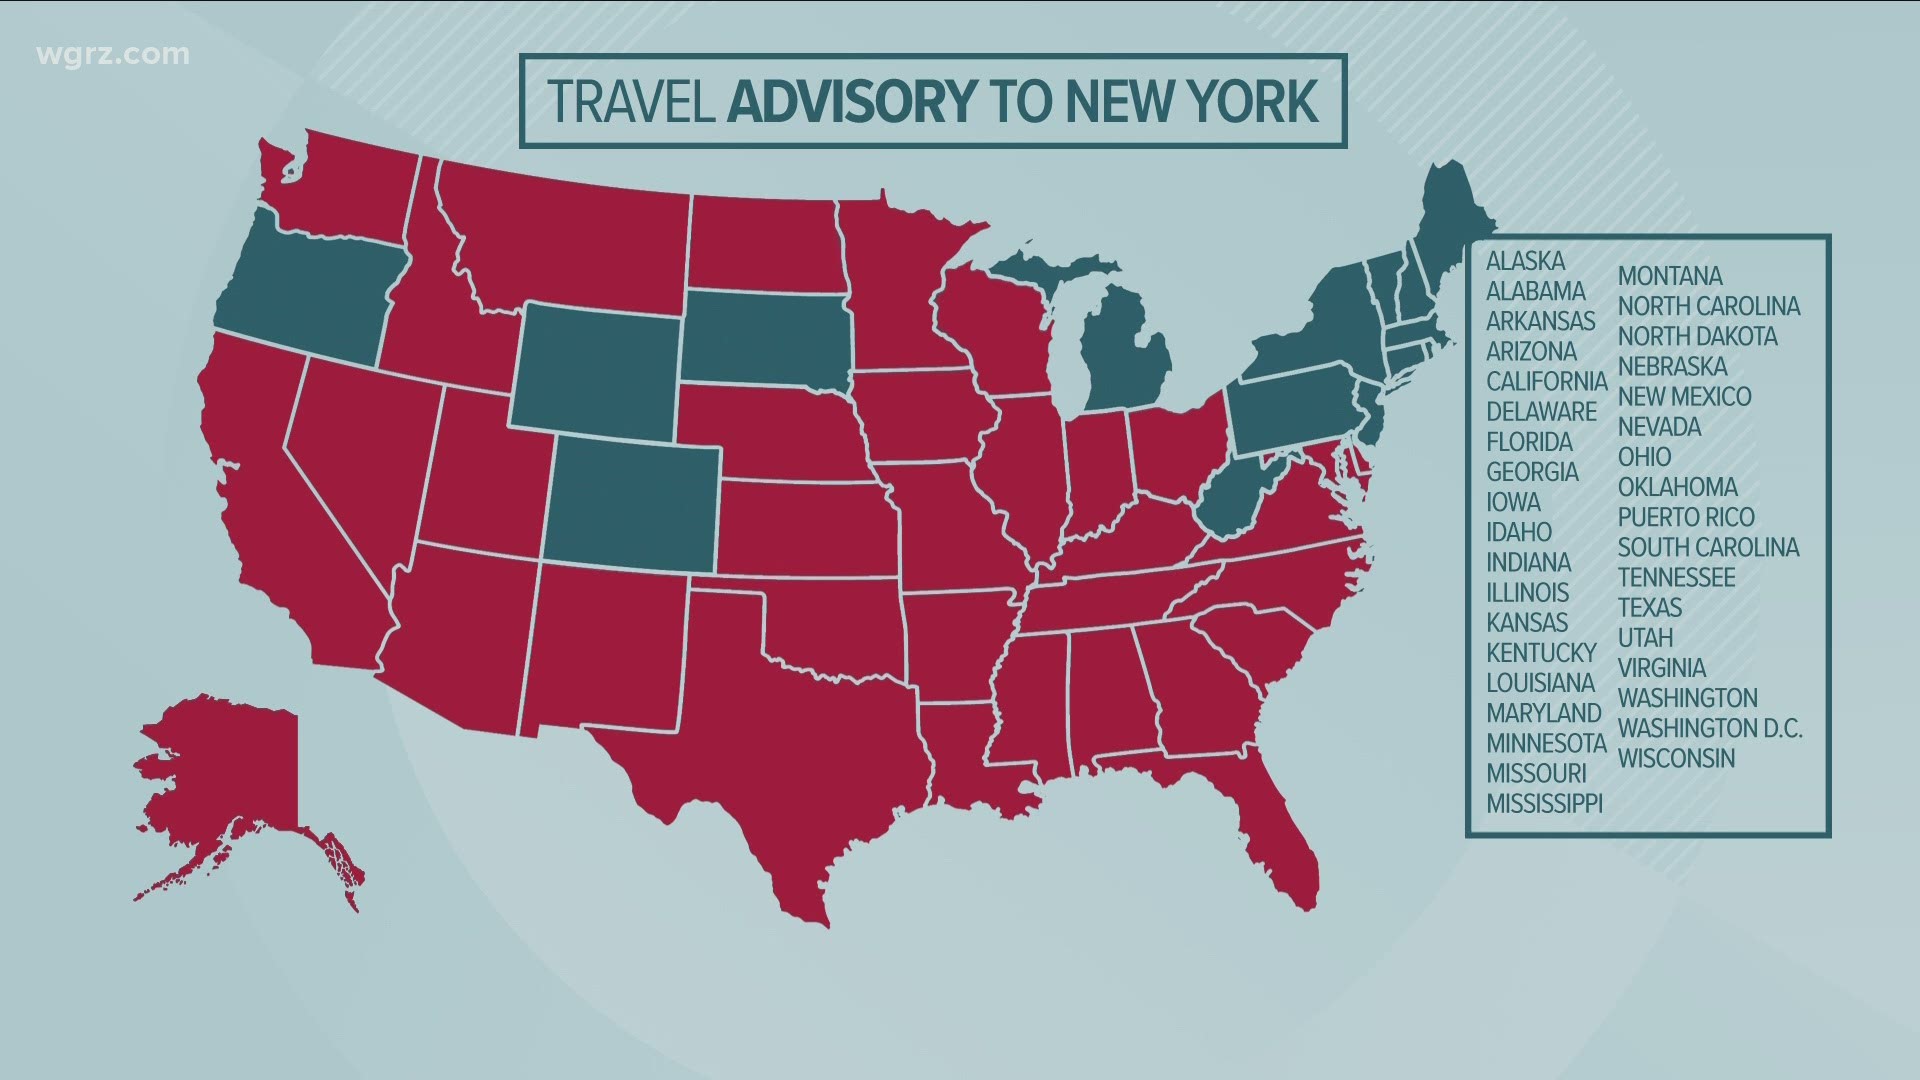 you'll have to quarantine for 14 days when you come back to New York. Same goes for visitors from those states.